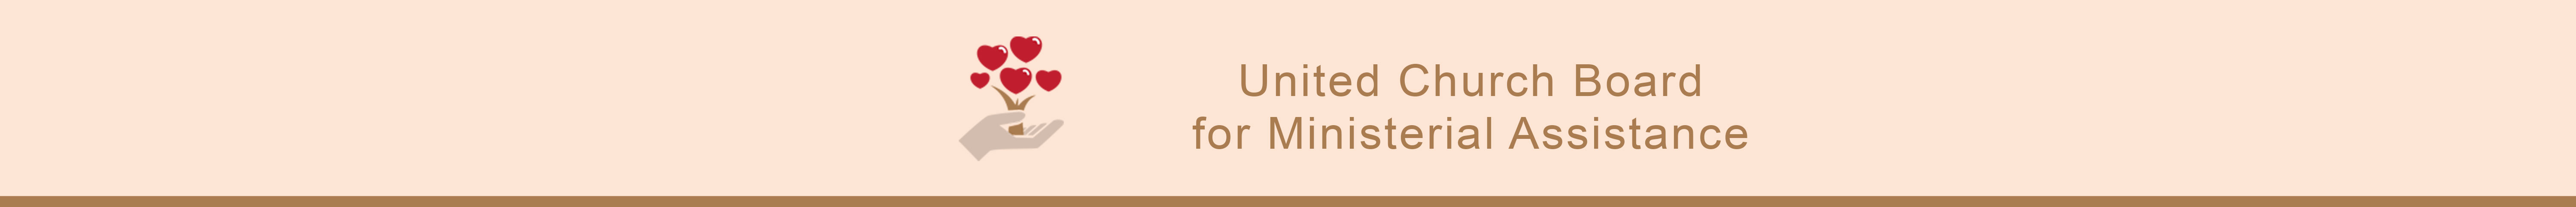 The Pension Boards - UCC - Ministerial Assistance